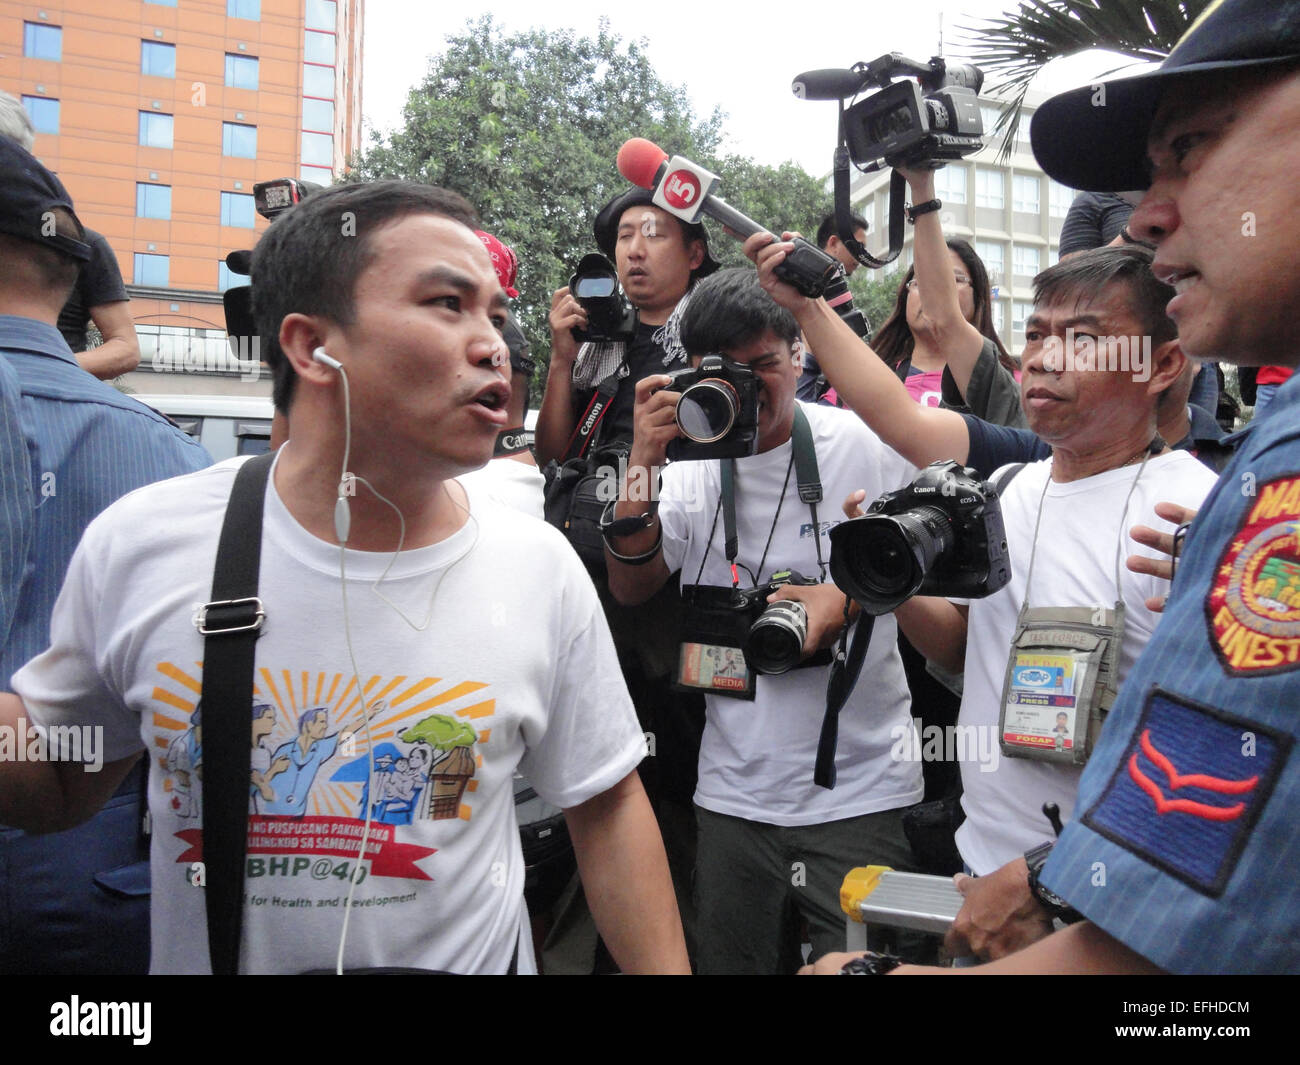 A protester confronts a police officer after spraying a message on the center aisle along Roxas Boulevard, near the US Embassy. Protesters accused President Benigno Aquino III, suspended police chief Alan Purisinma, and the US government of being involved in the botched anti-terror operation that killed 44 police commandos, 18 Moro rebels, and 7 civilians. The protest was held on the 116th anniversary of the Filipino-American War that claimed at least 600,000 lives. © Richard James Mendoza/Pacific Press/Alamy Live News Stock Photo